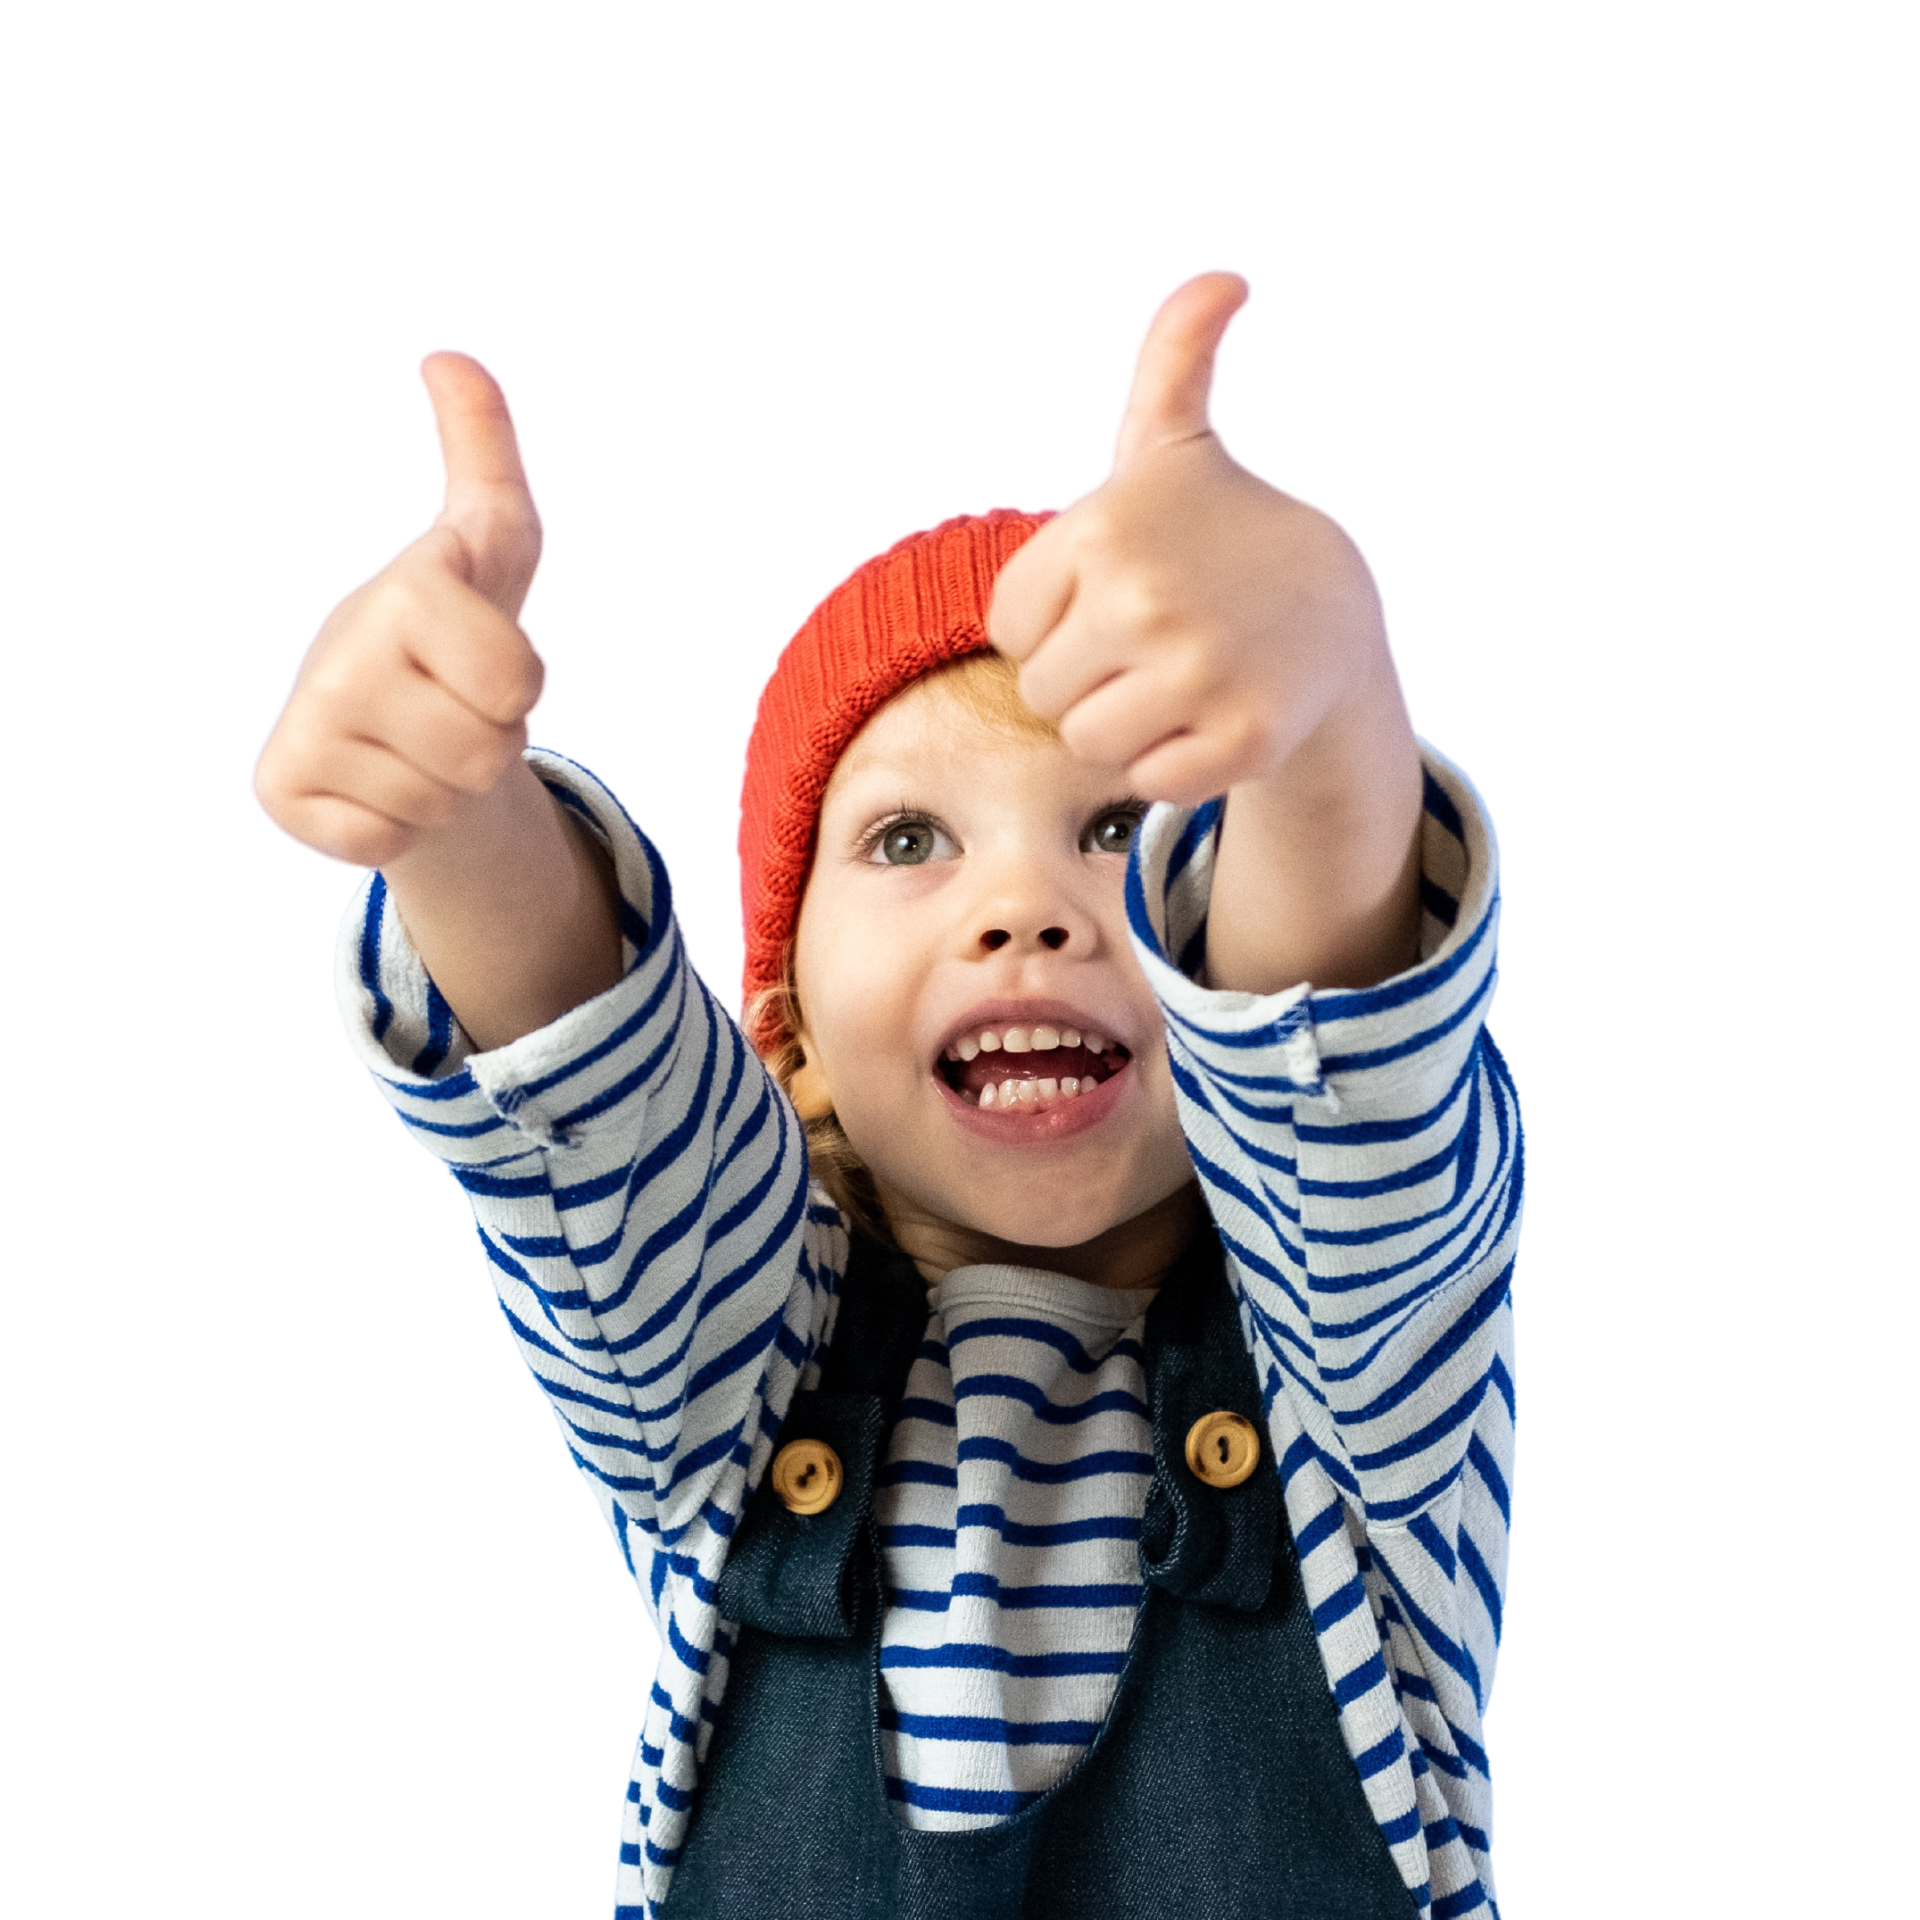 A smiling young boy raises his thumbs. He has a red hat on and wears a sailor t-shirt and an overall.  